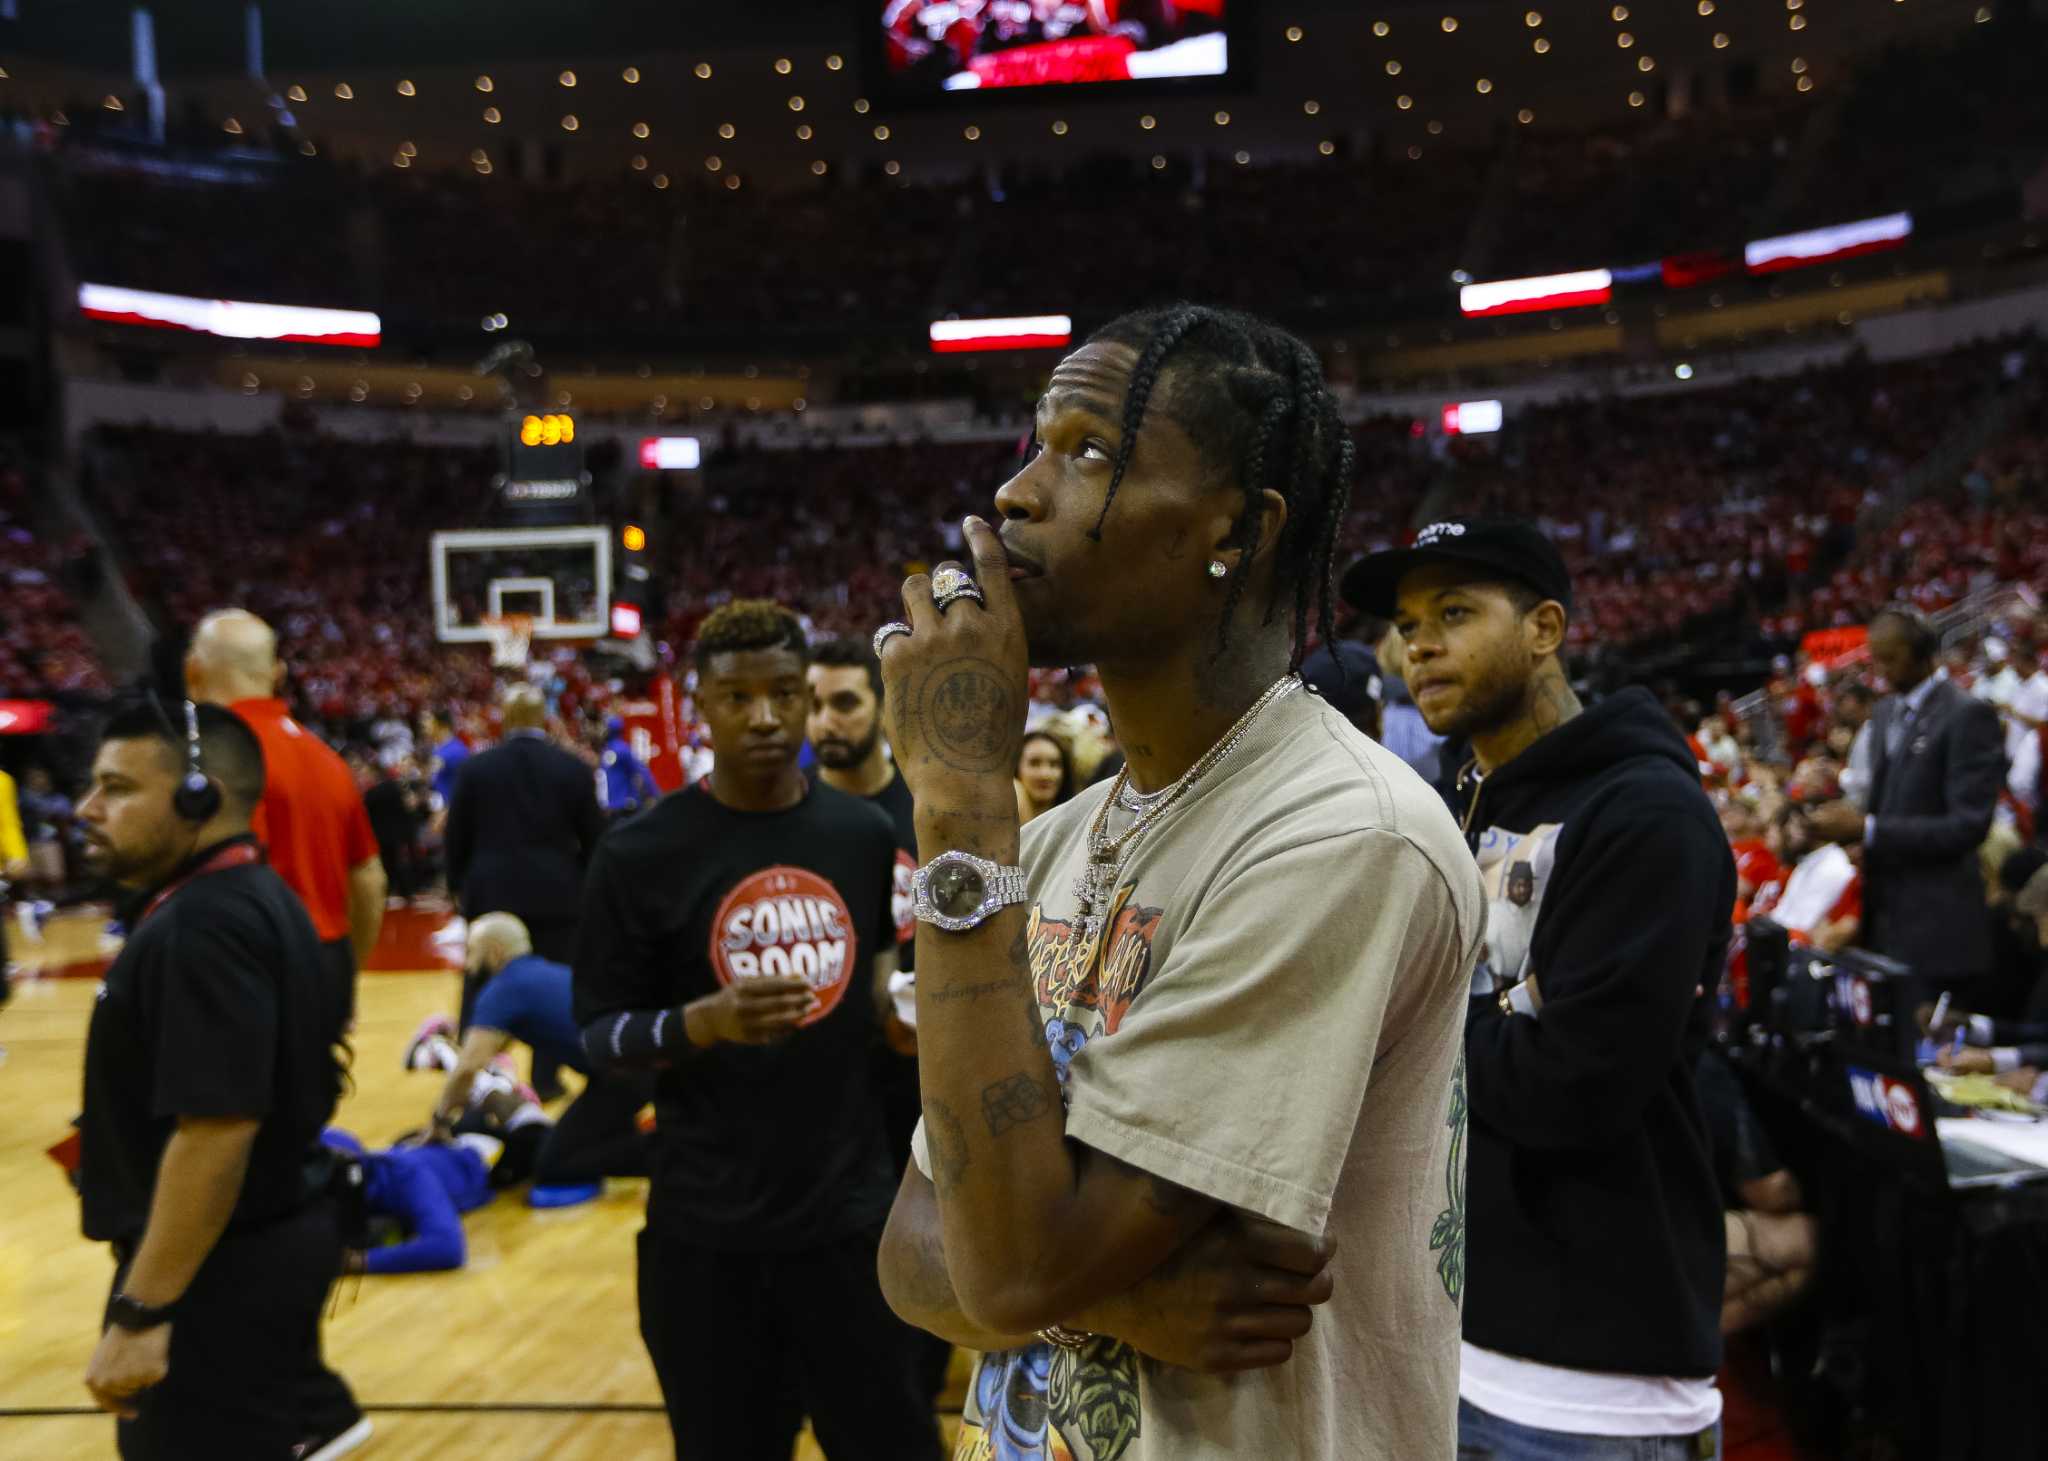 Travis Scott to Launch T-Shirt Line With Houston Rockets